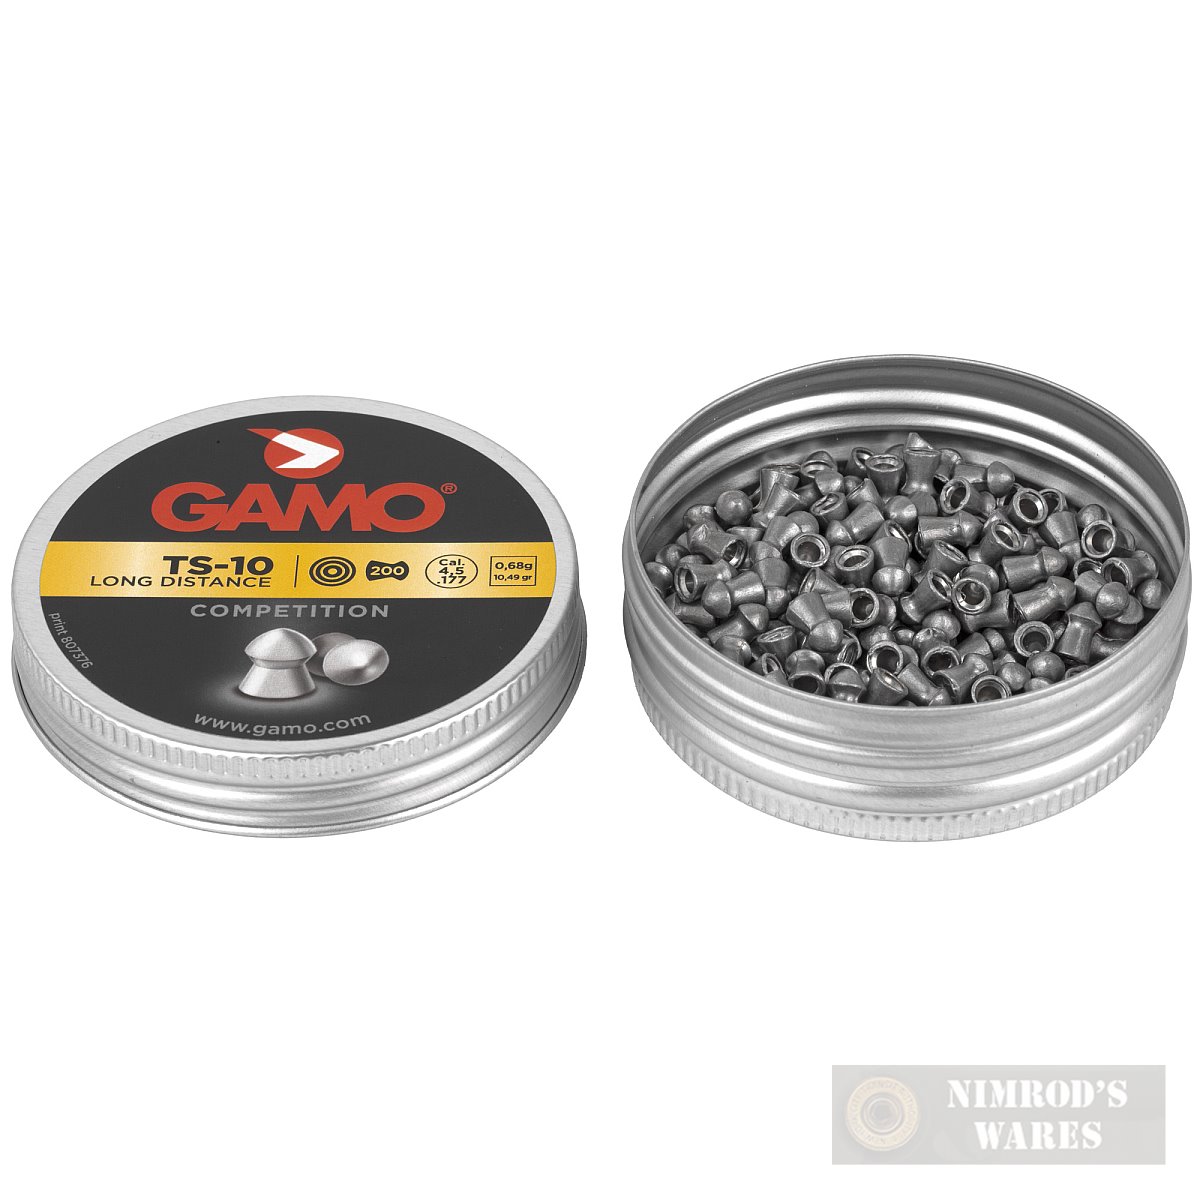 Gamo TS-10 LONG DISTANCE COMPETITION .177 Pellets 2-PACK Domed-img-2